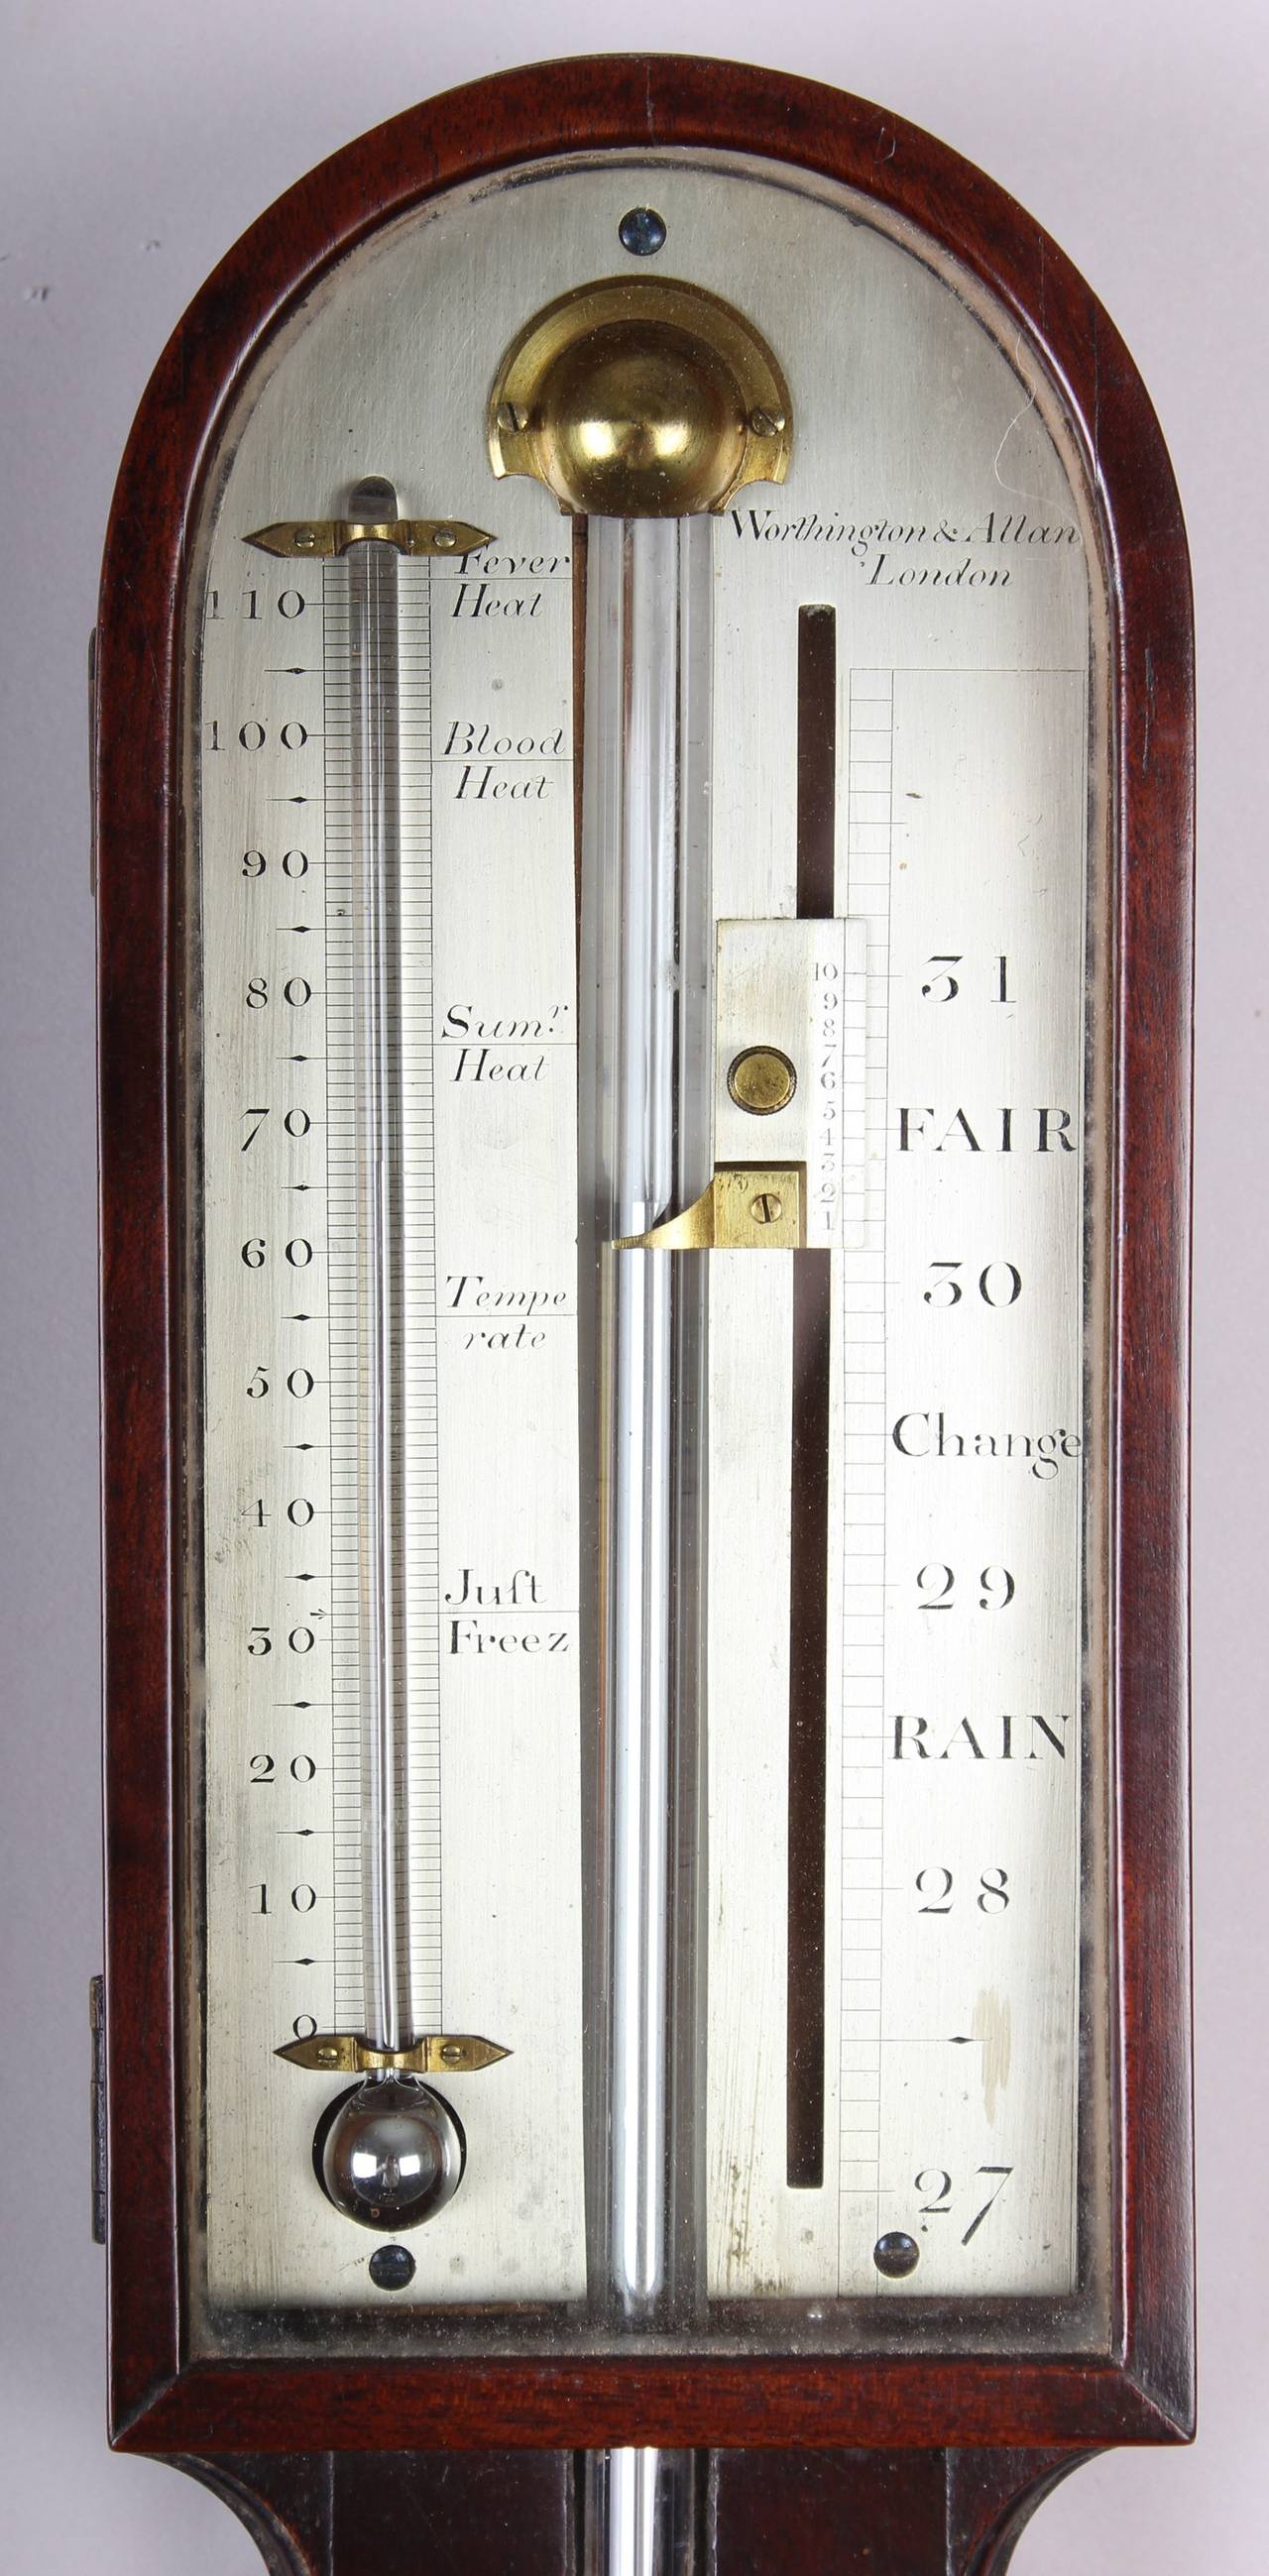 Early 19th century mahogany stick barometer by Worthington & Allan, London; the enclosed arched and silvered register fitted with a thermometer; the richly-coloured case with a chevron veneered ground and a hemi-spherical cistern-cover.